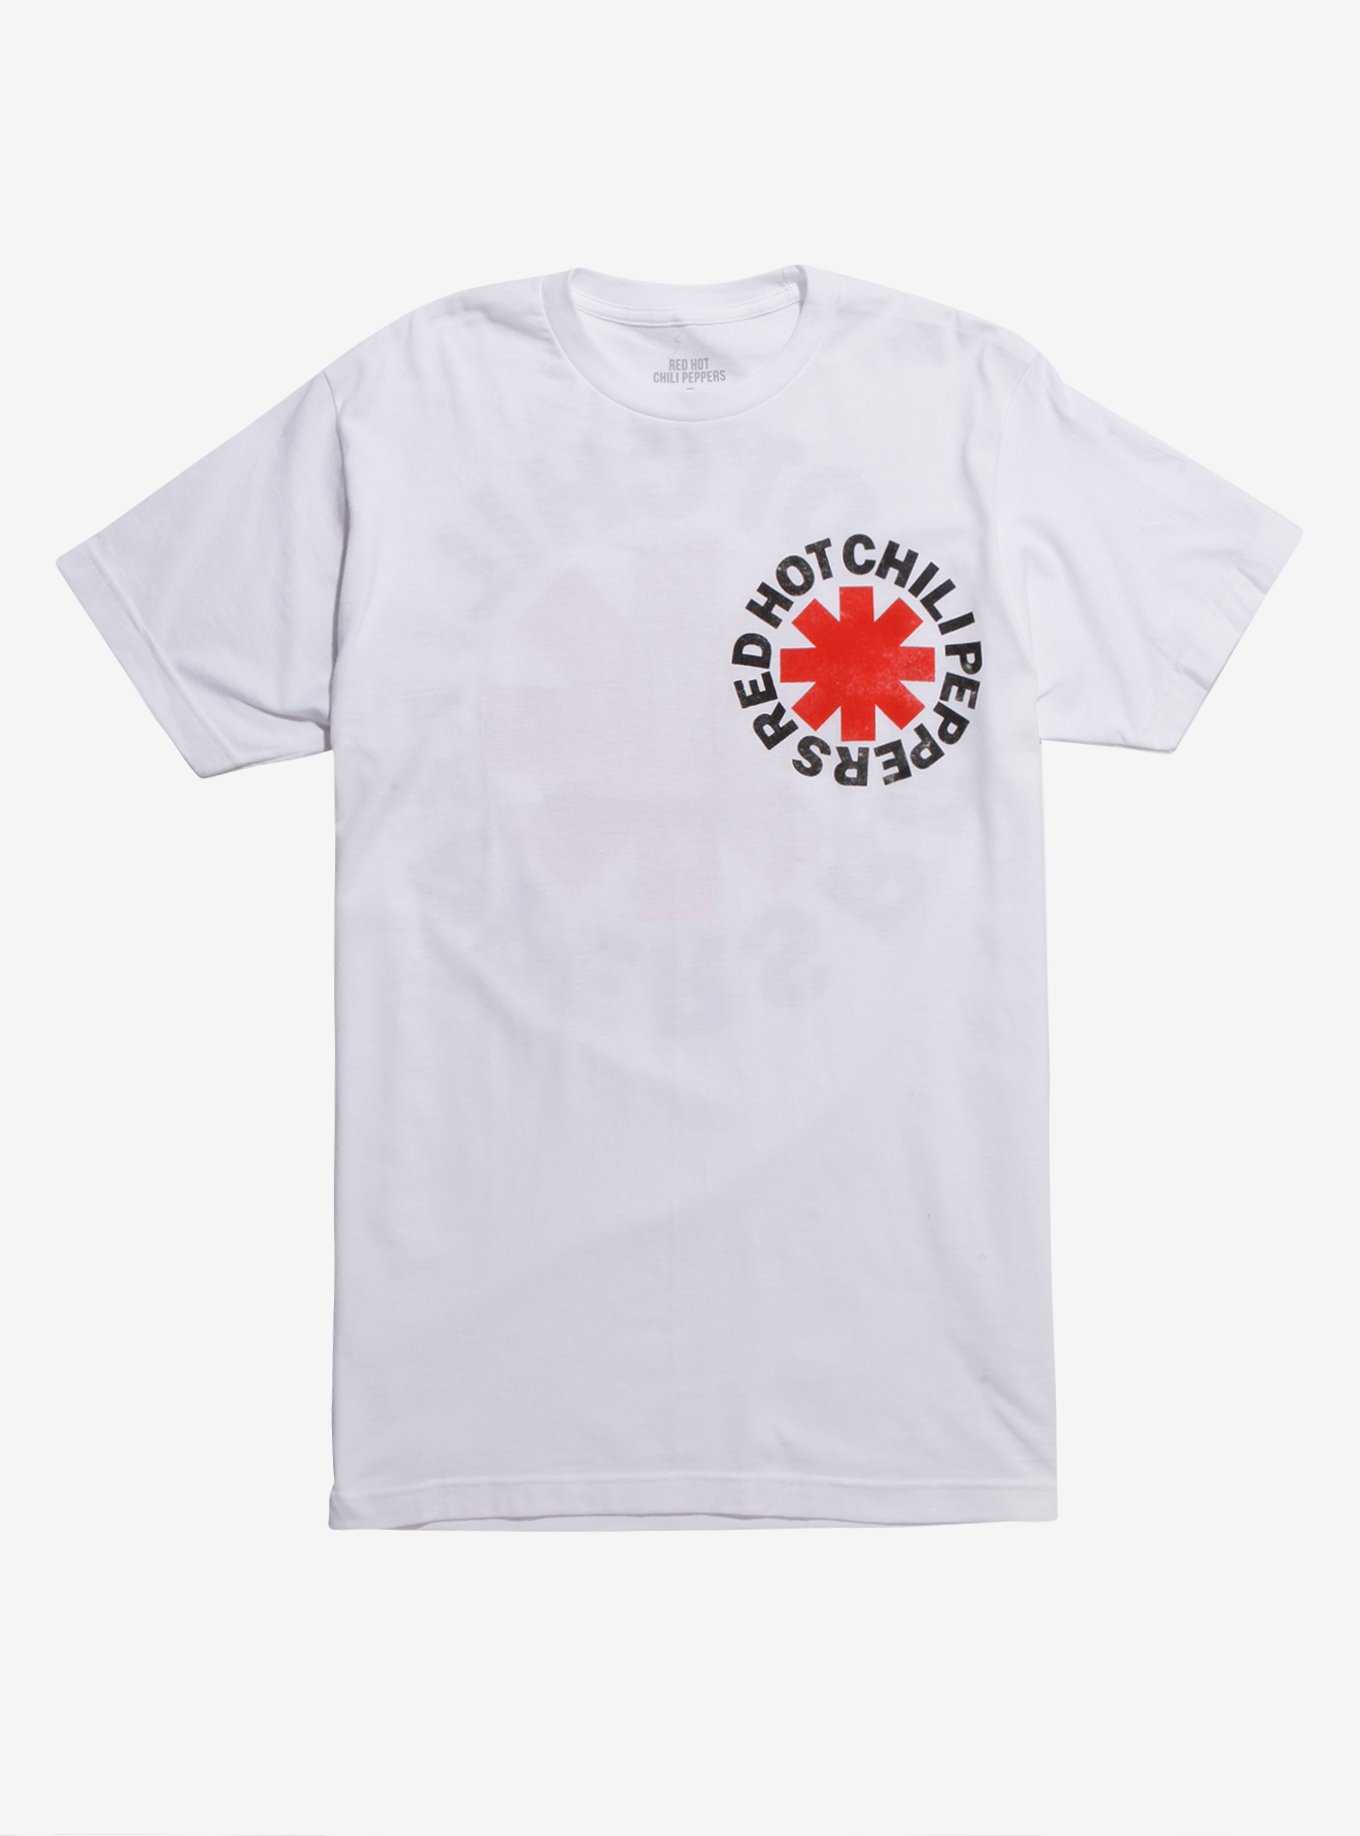 & Topic T-Shirts | Chili Hot Merch Hot Red OFFICIAL Peppers